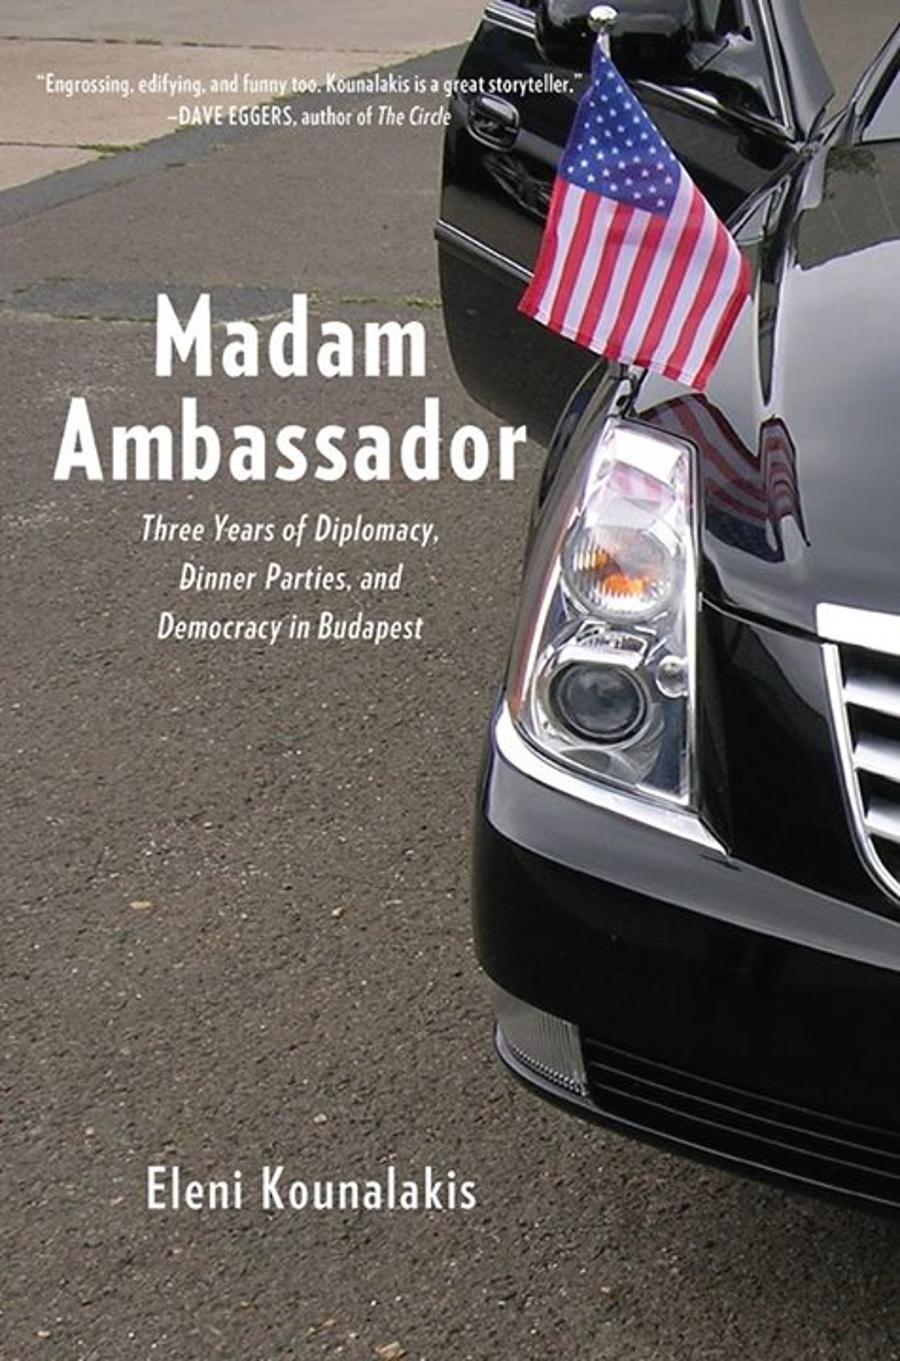 Video: Former U.S. Ambassador To Hungary Launches Book About Her Experiences